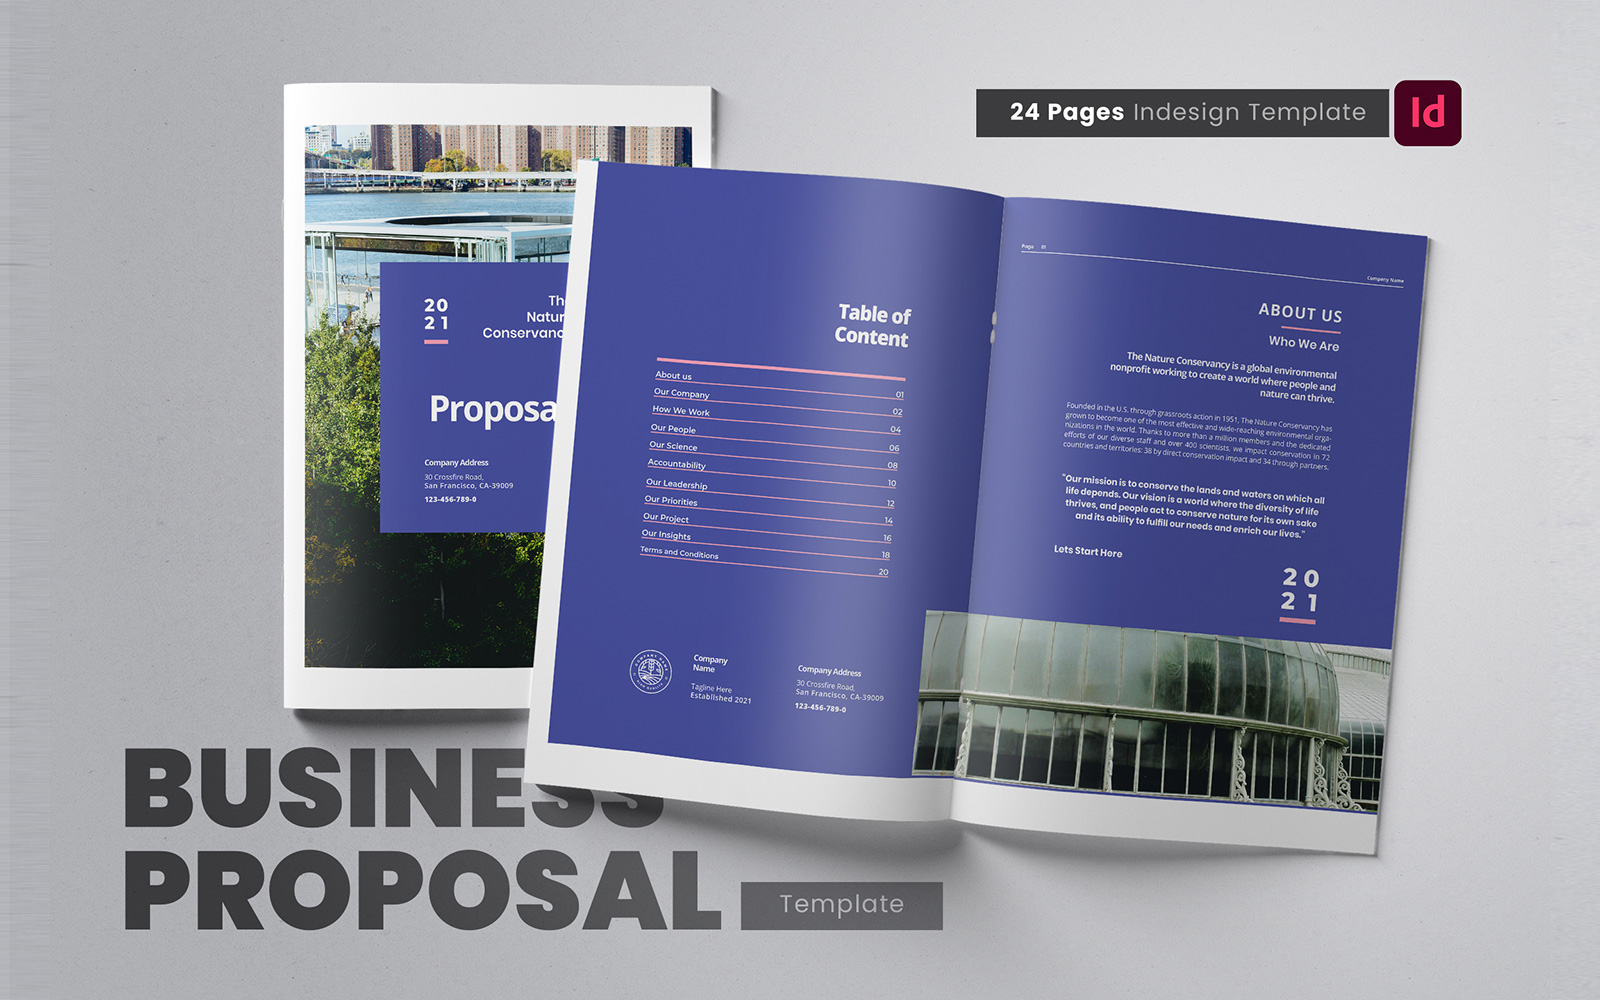 Business Project Proposal Indesign Template - Corporate Identity For Business Proposal Template Indesign